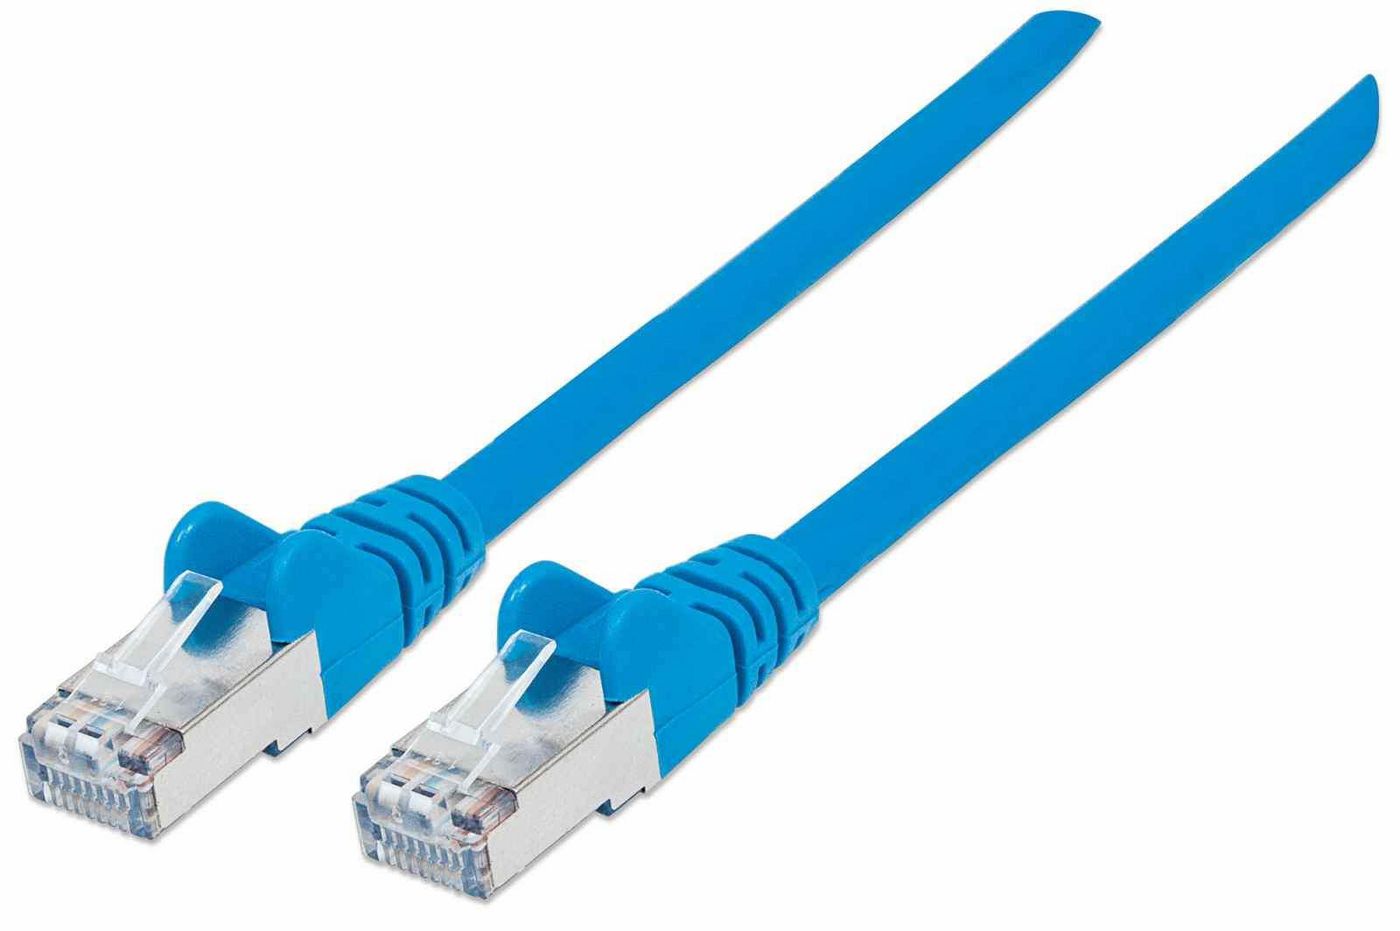 Intellinet 741033 High Performance Network Cable 